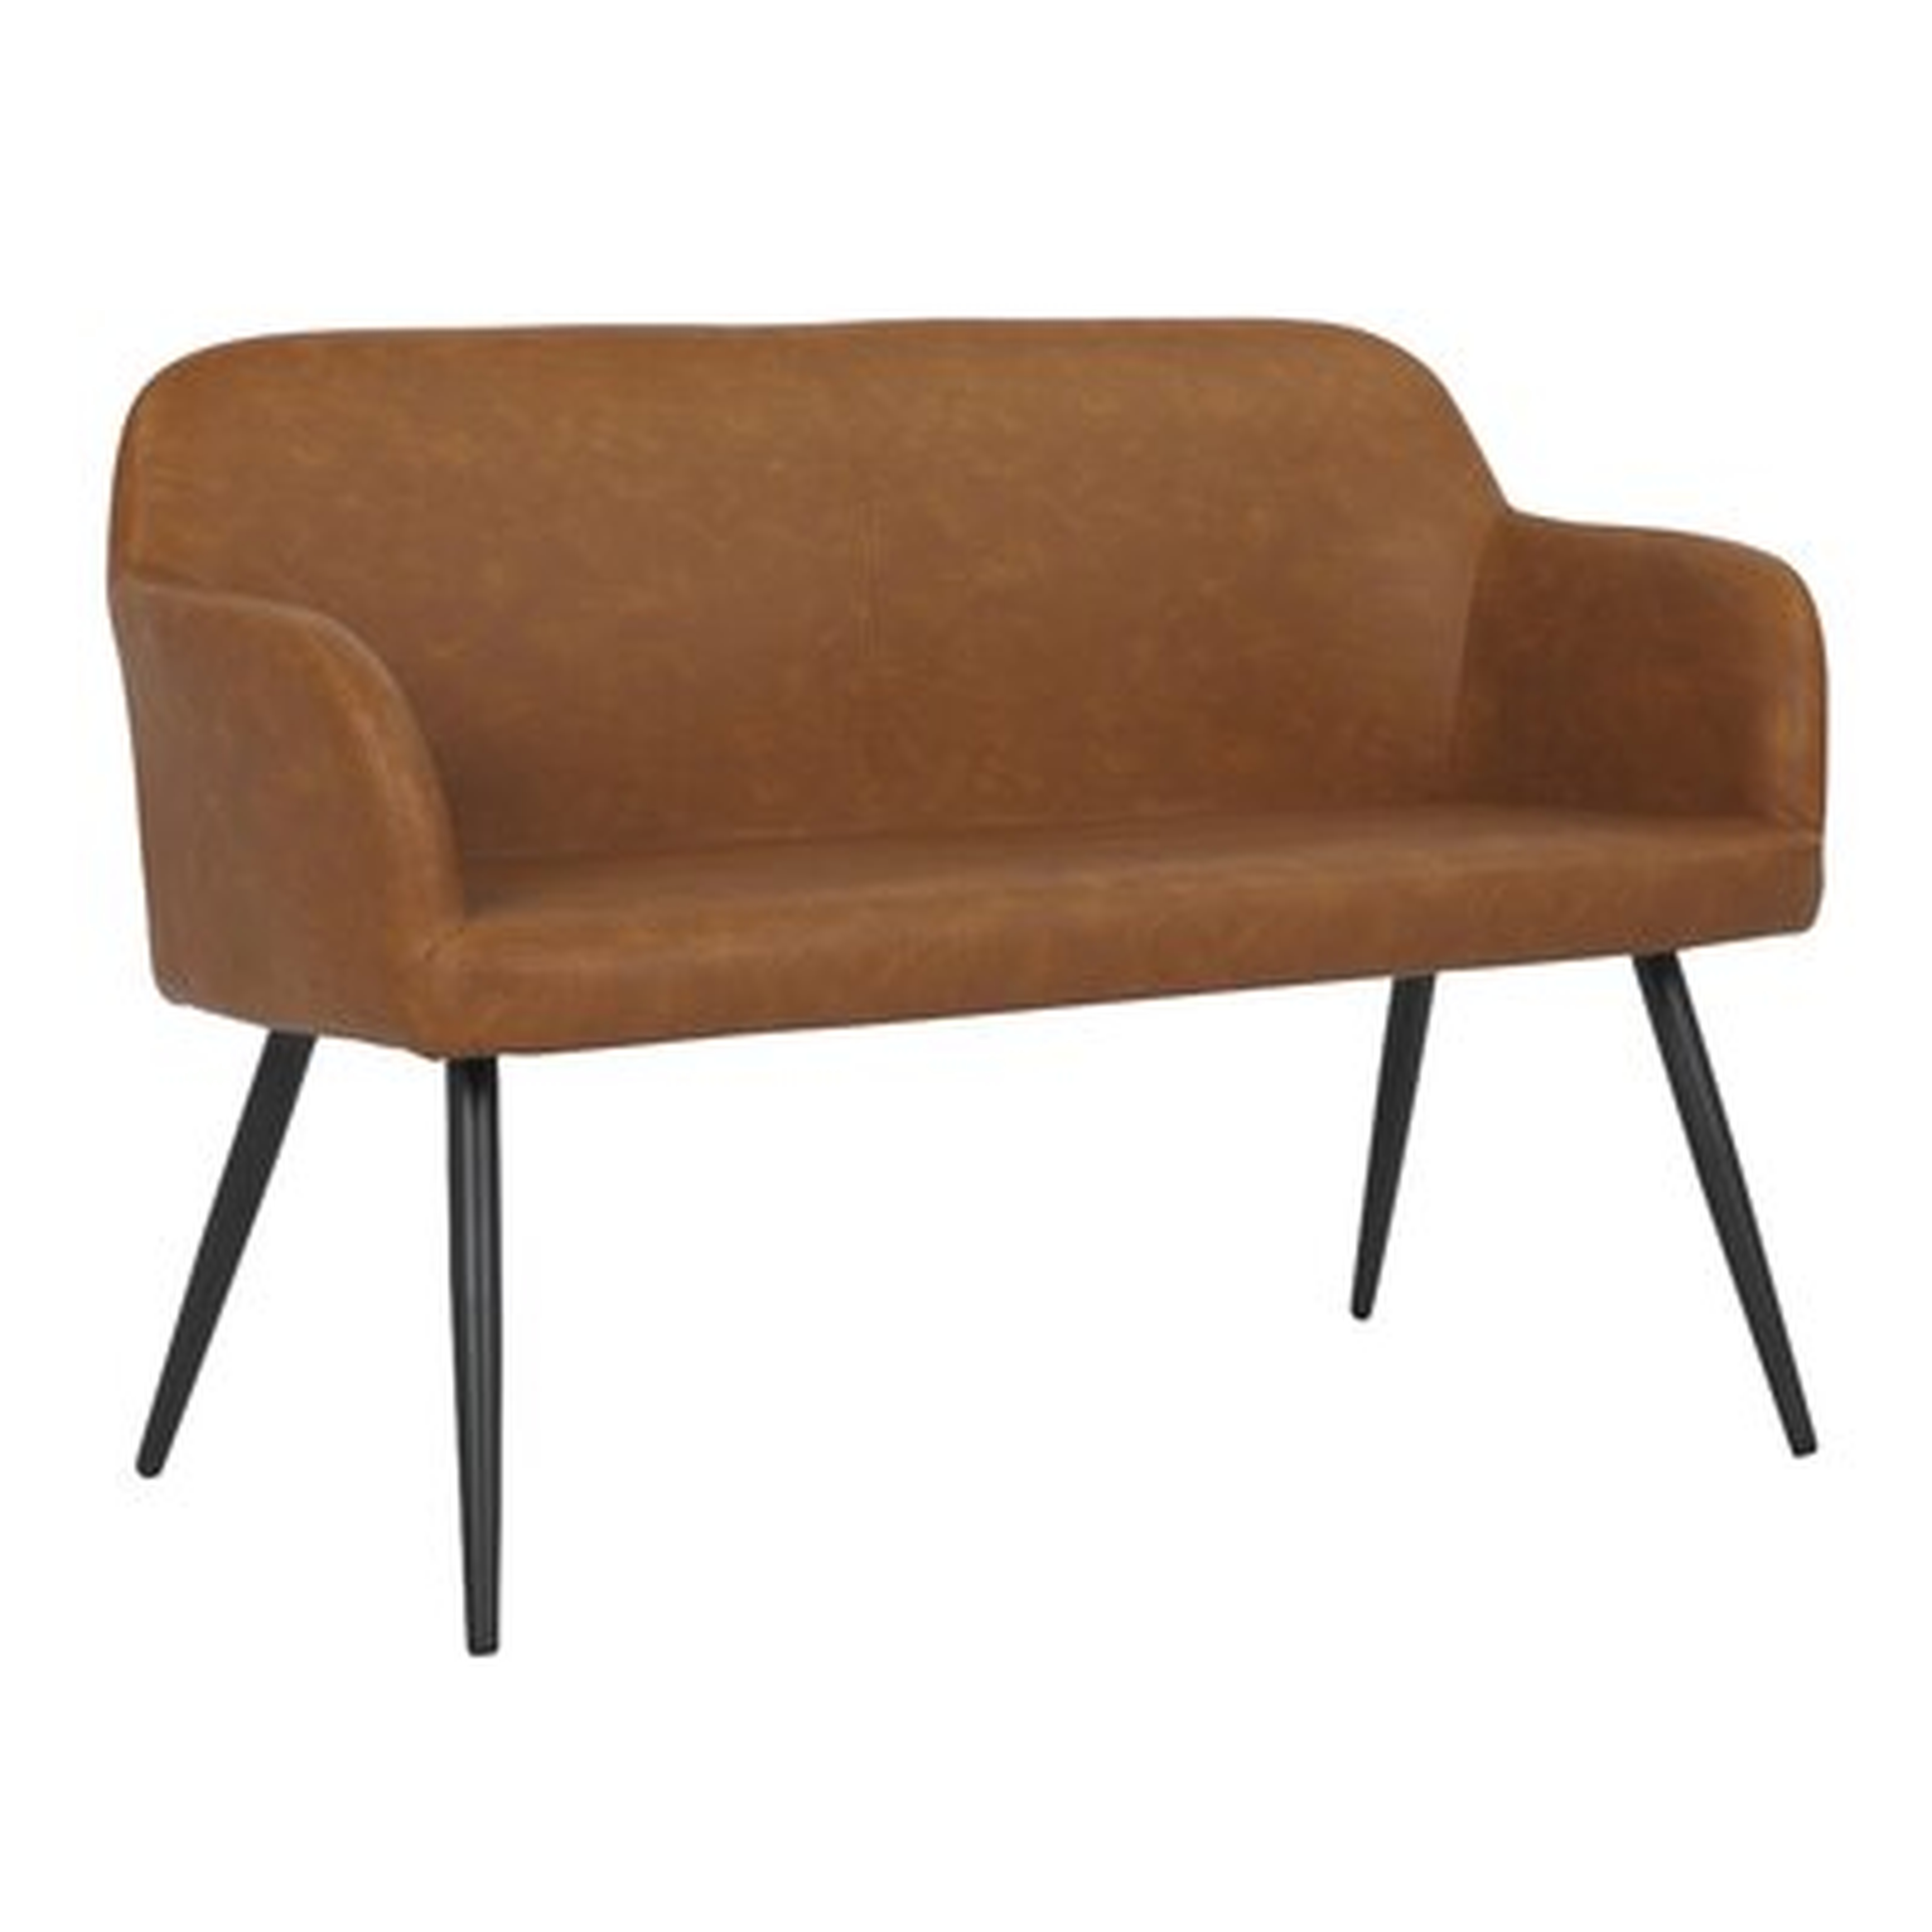 Ankney Faux Leather Bench - Wayfair